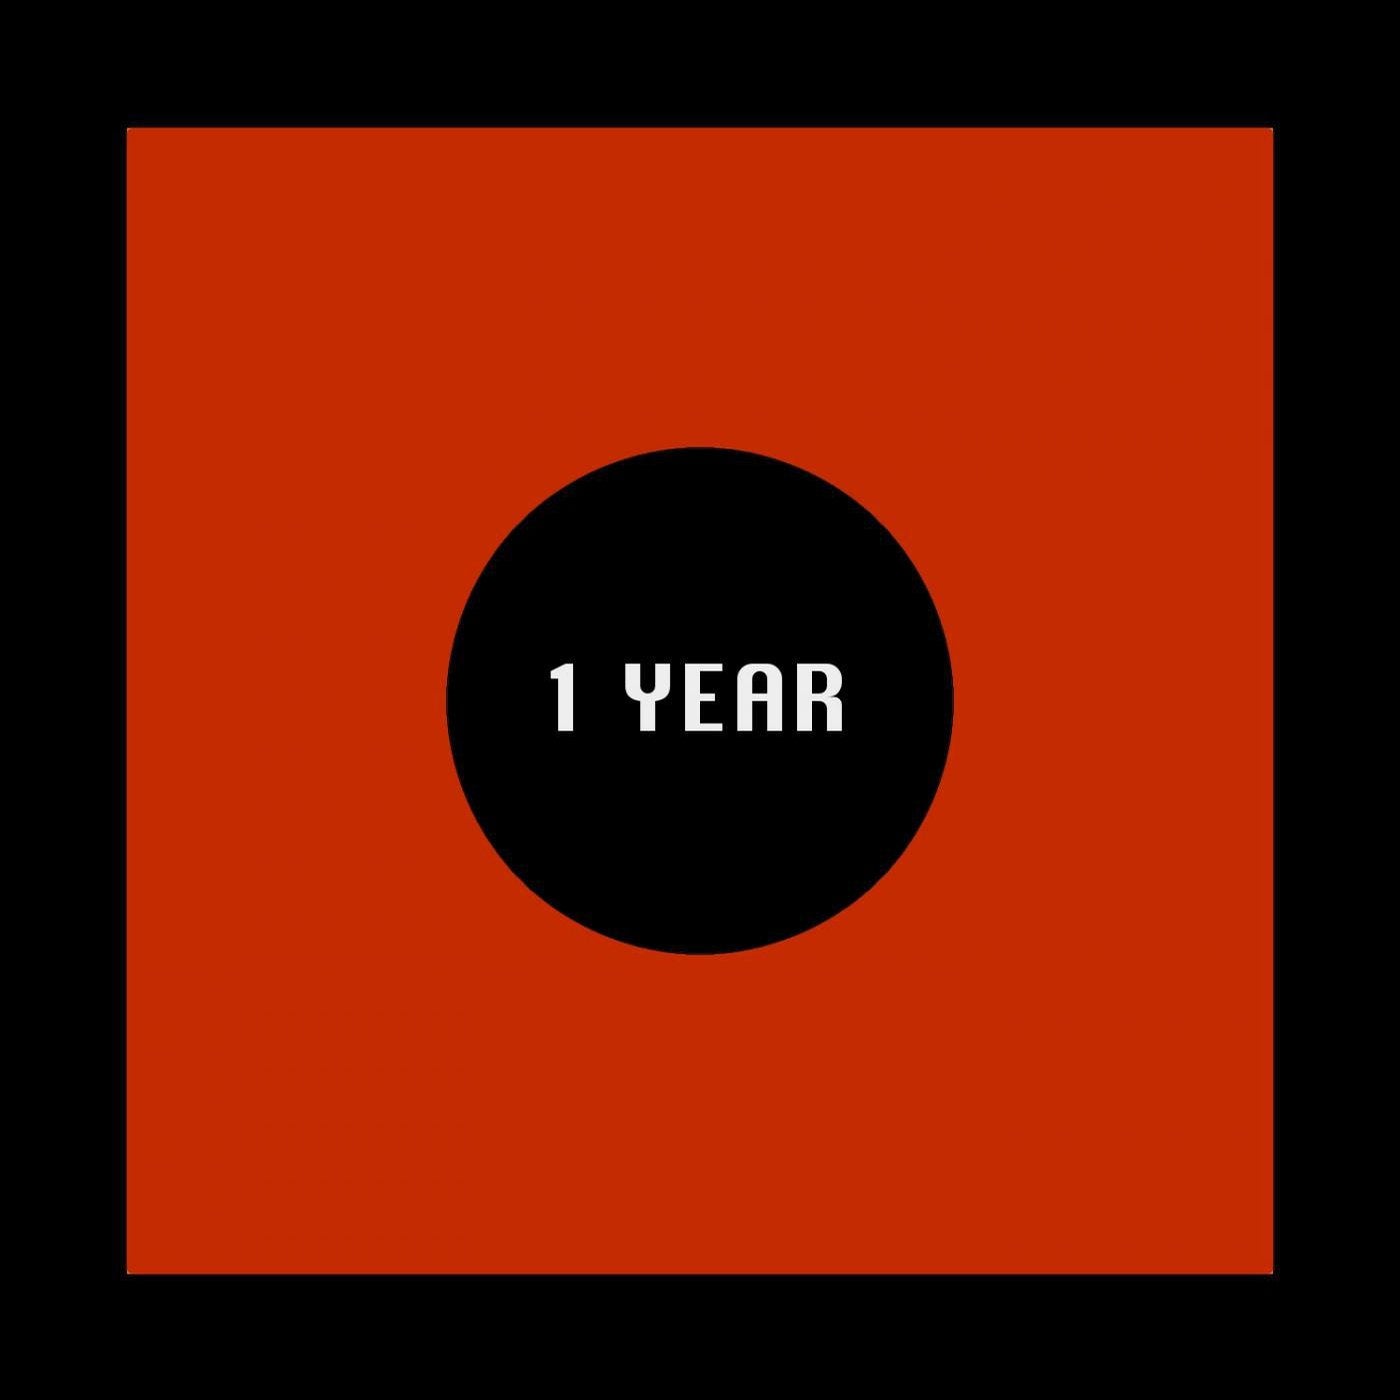 BLACKPOINT RECORDS 1 YEAR